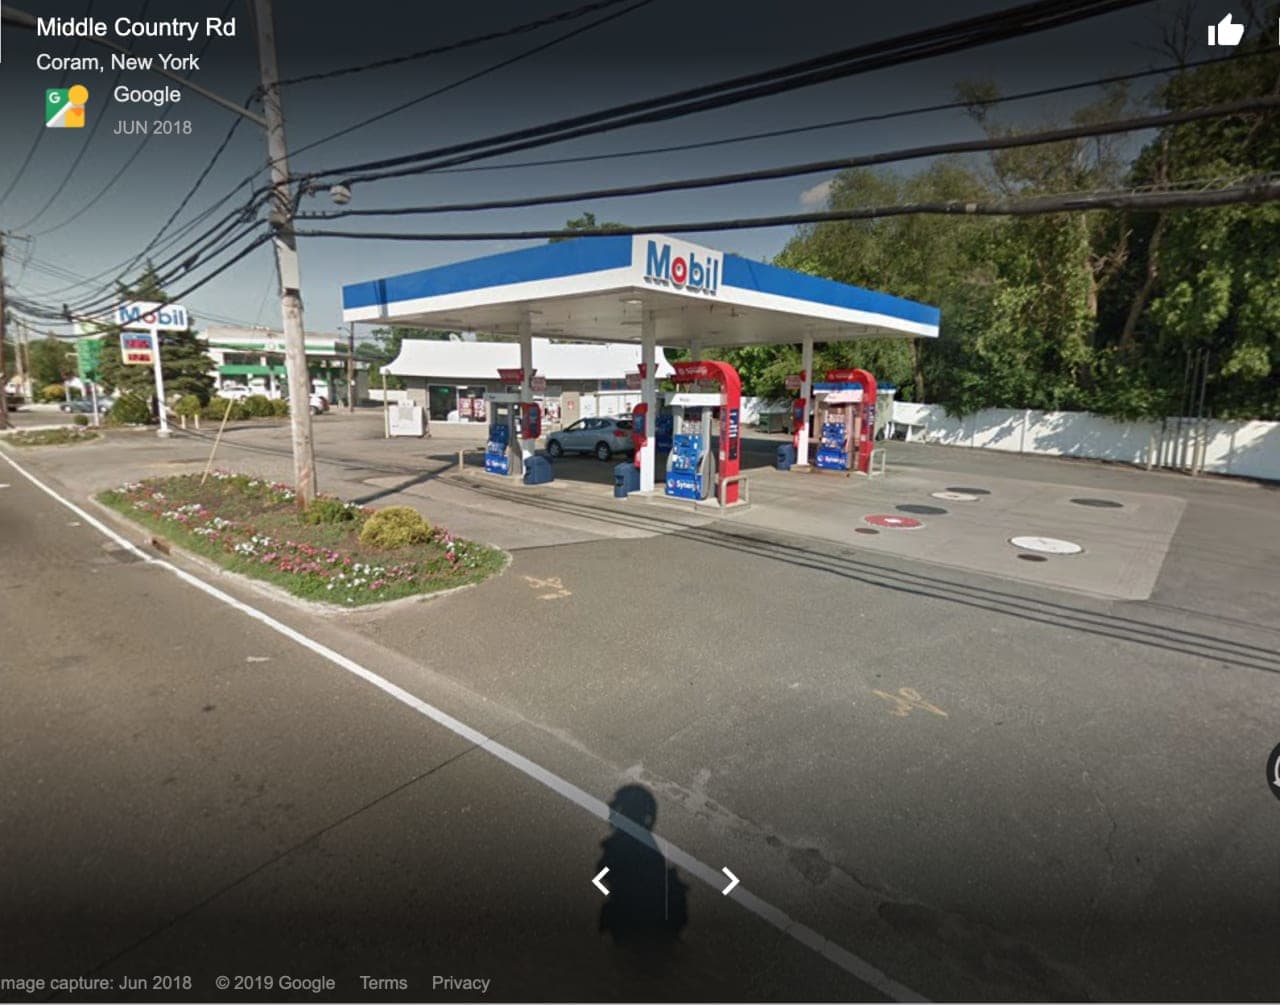 A masked man robbed a Coram gas station, according to police.